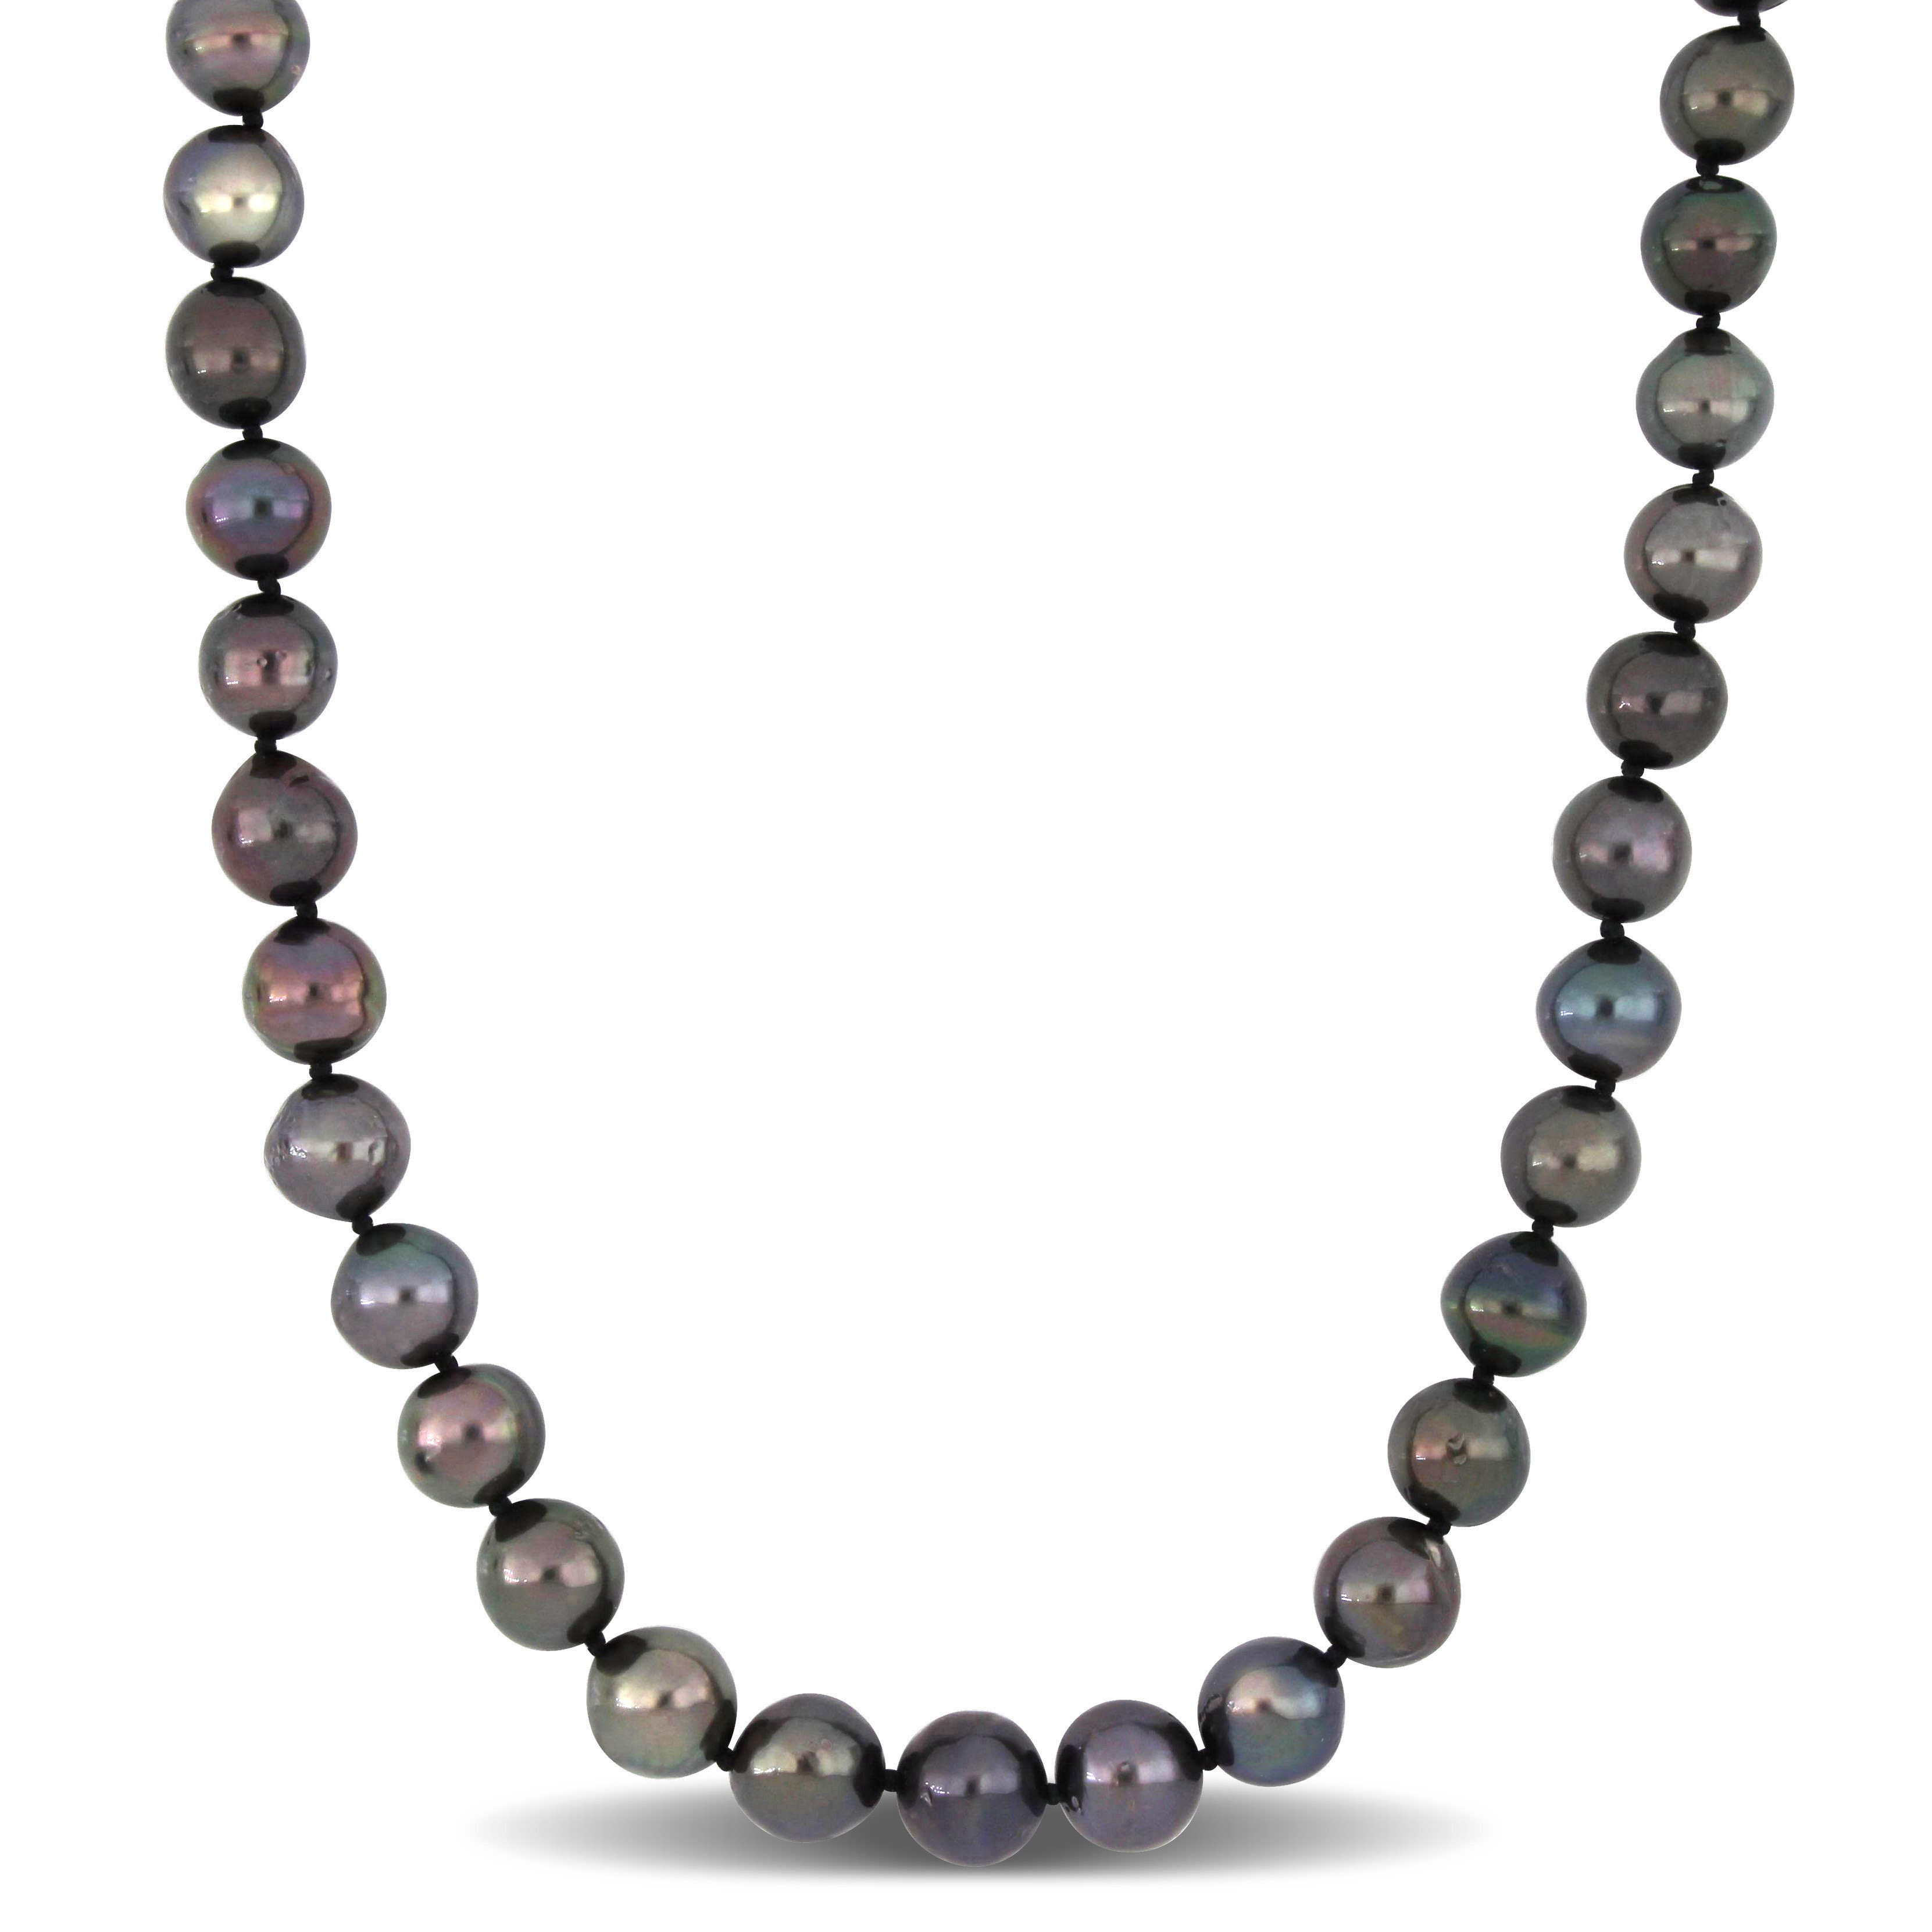 8-10 MM Black Tahitian Cultured Pearl Strand Necklace in Sterling Silver - 18 in